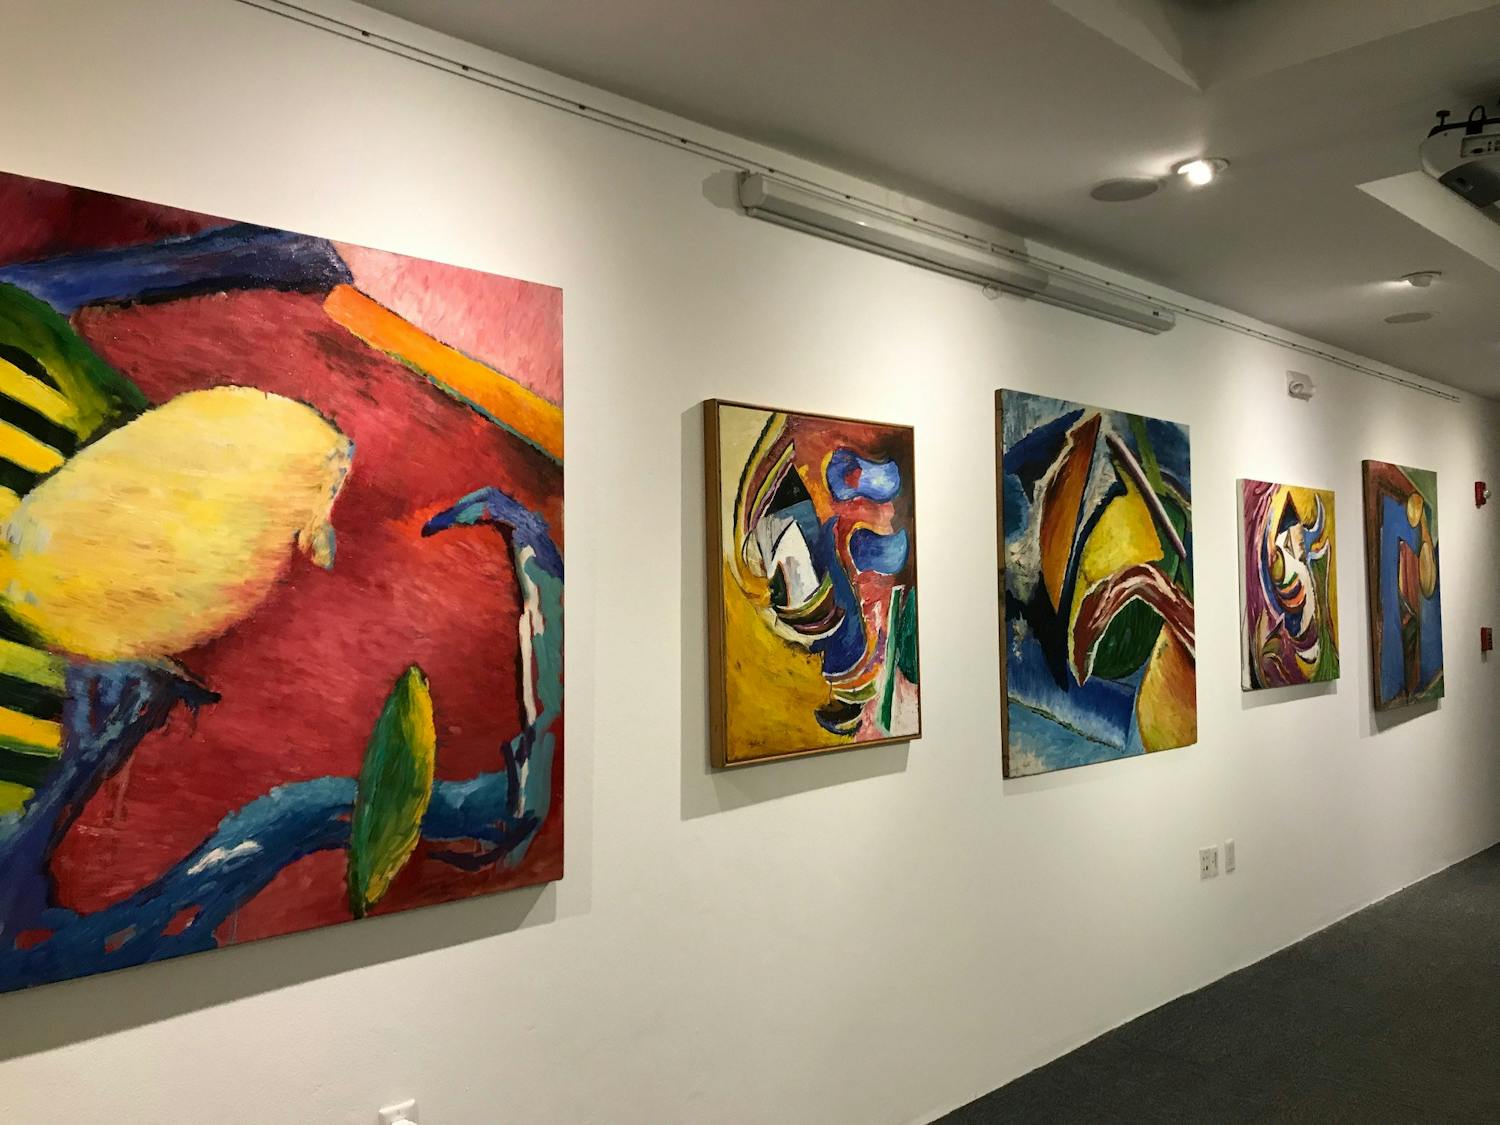 Bendel Hydes exhibition 2019 at the National Gallery of the Cayman Islands